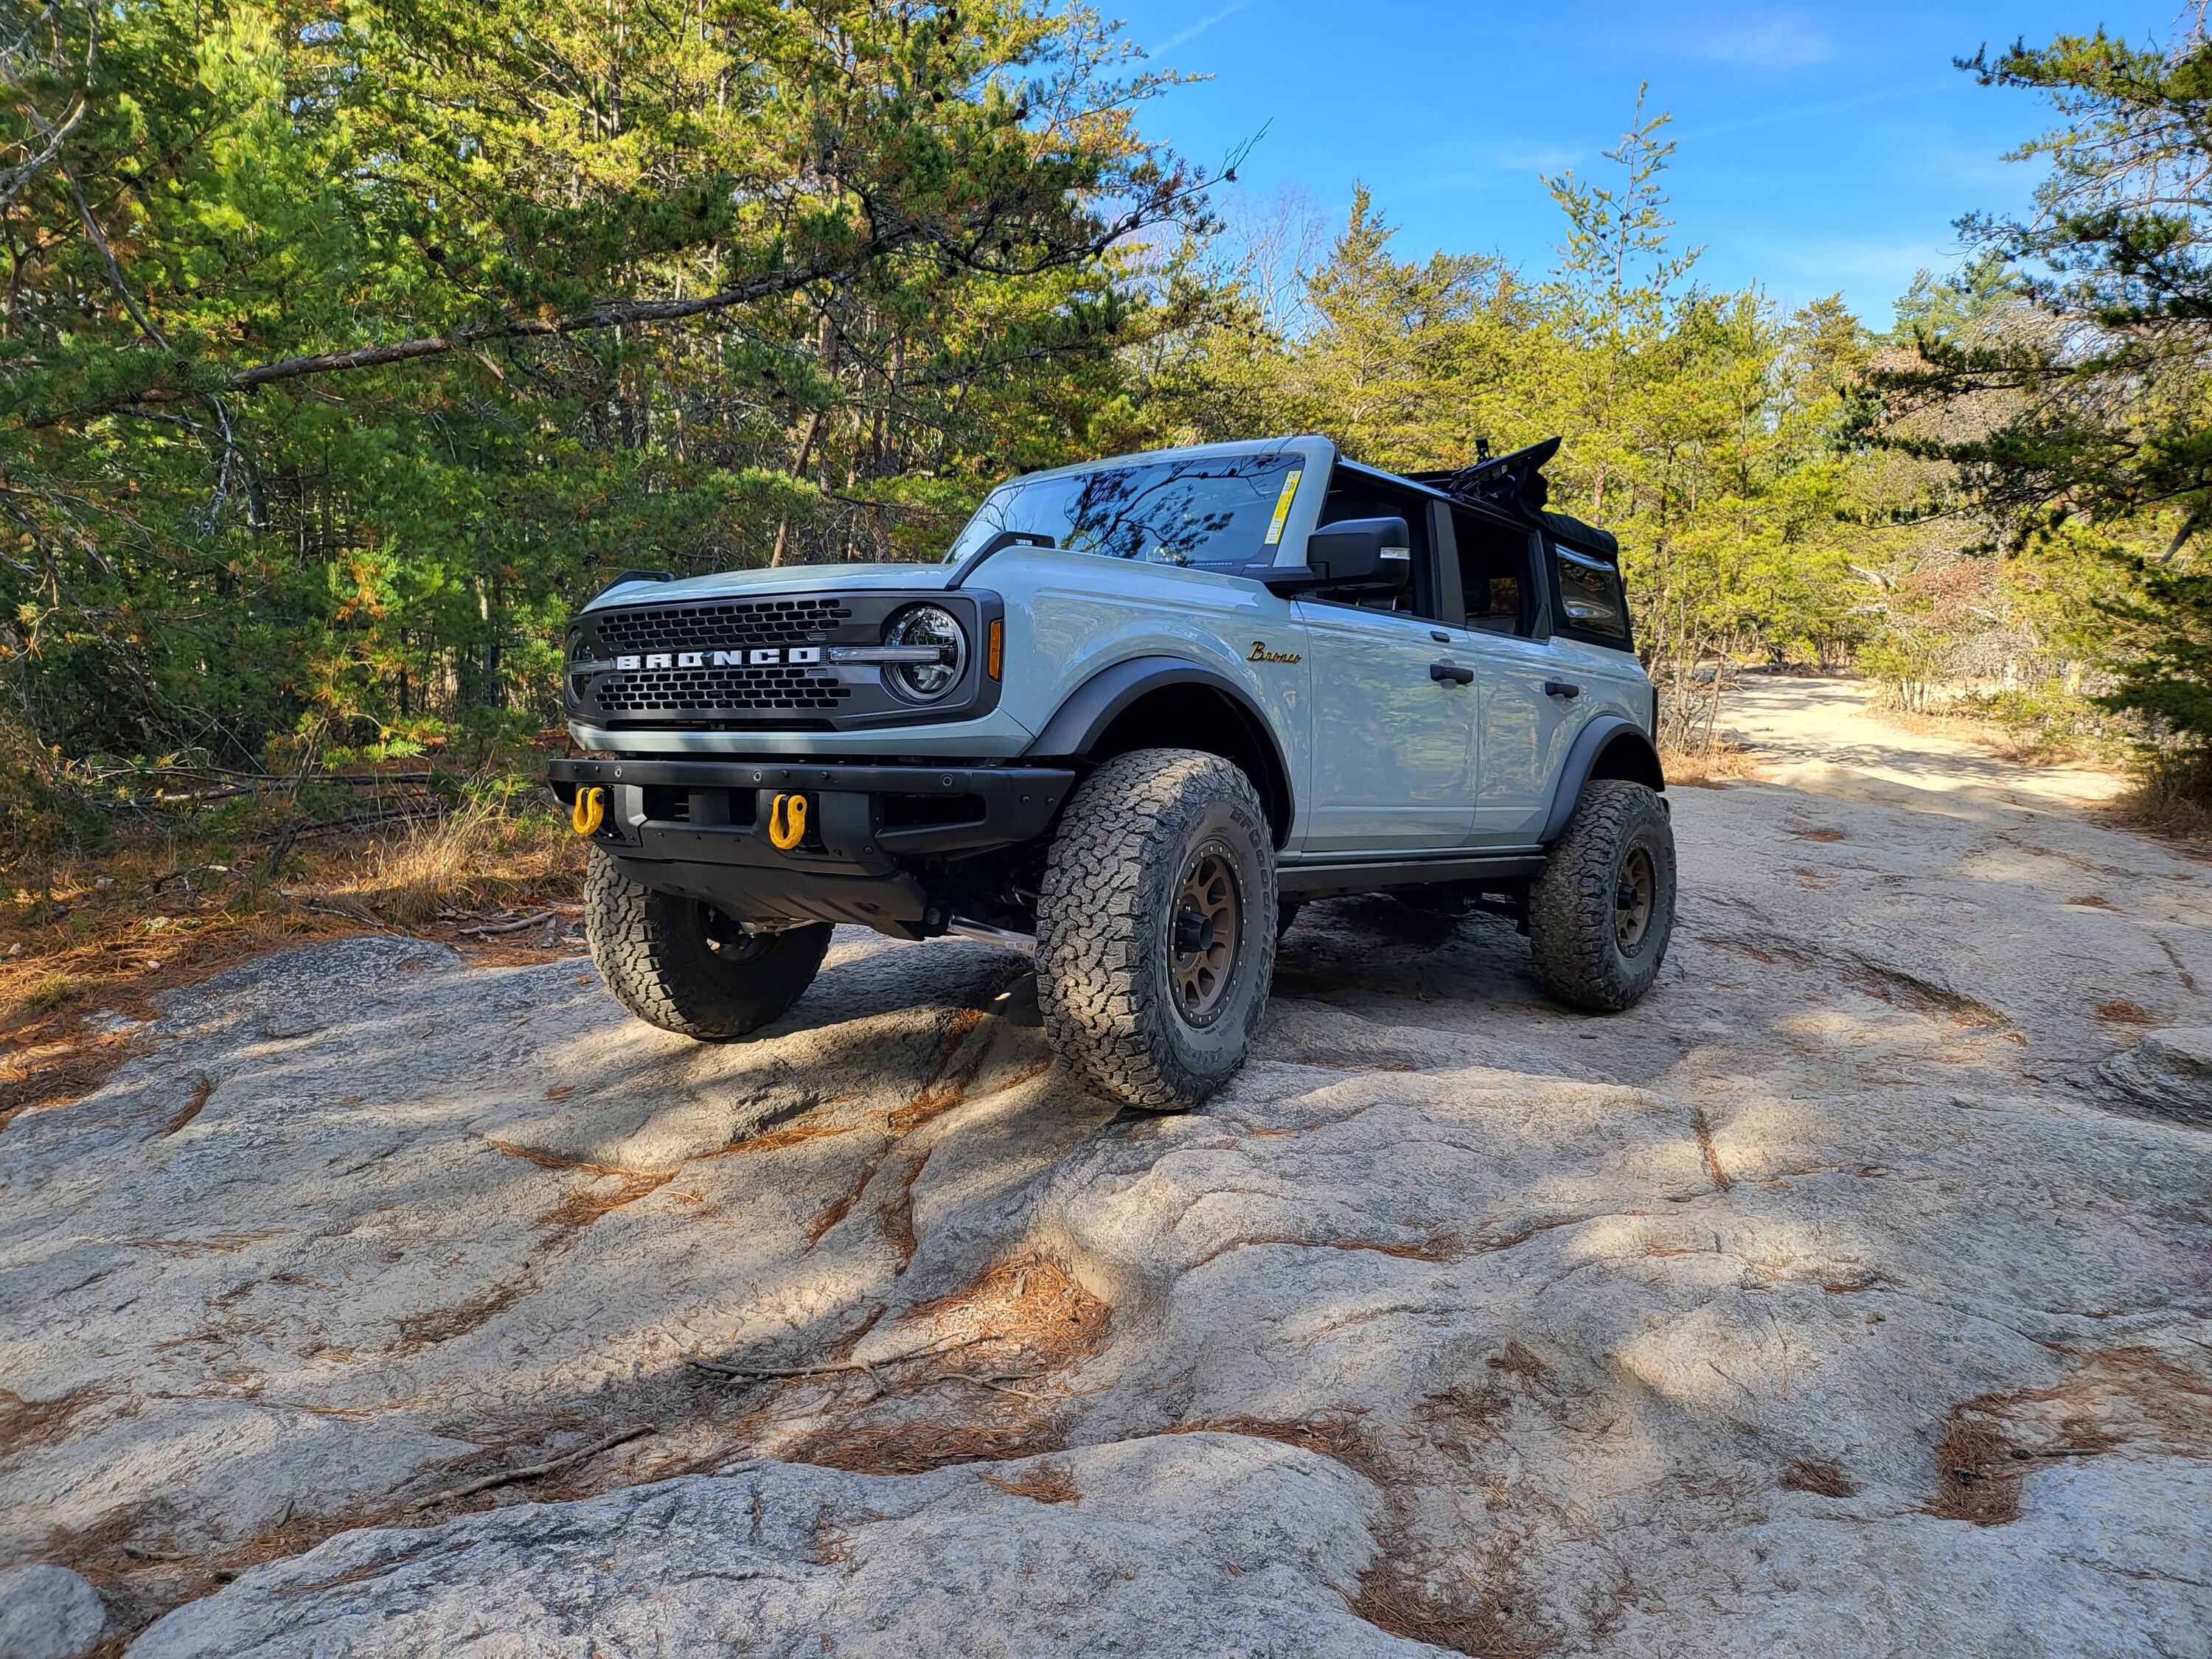 Ford Bronco Drop a Picture of Your Bronco for a Rating 20211202_143242